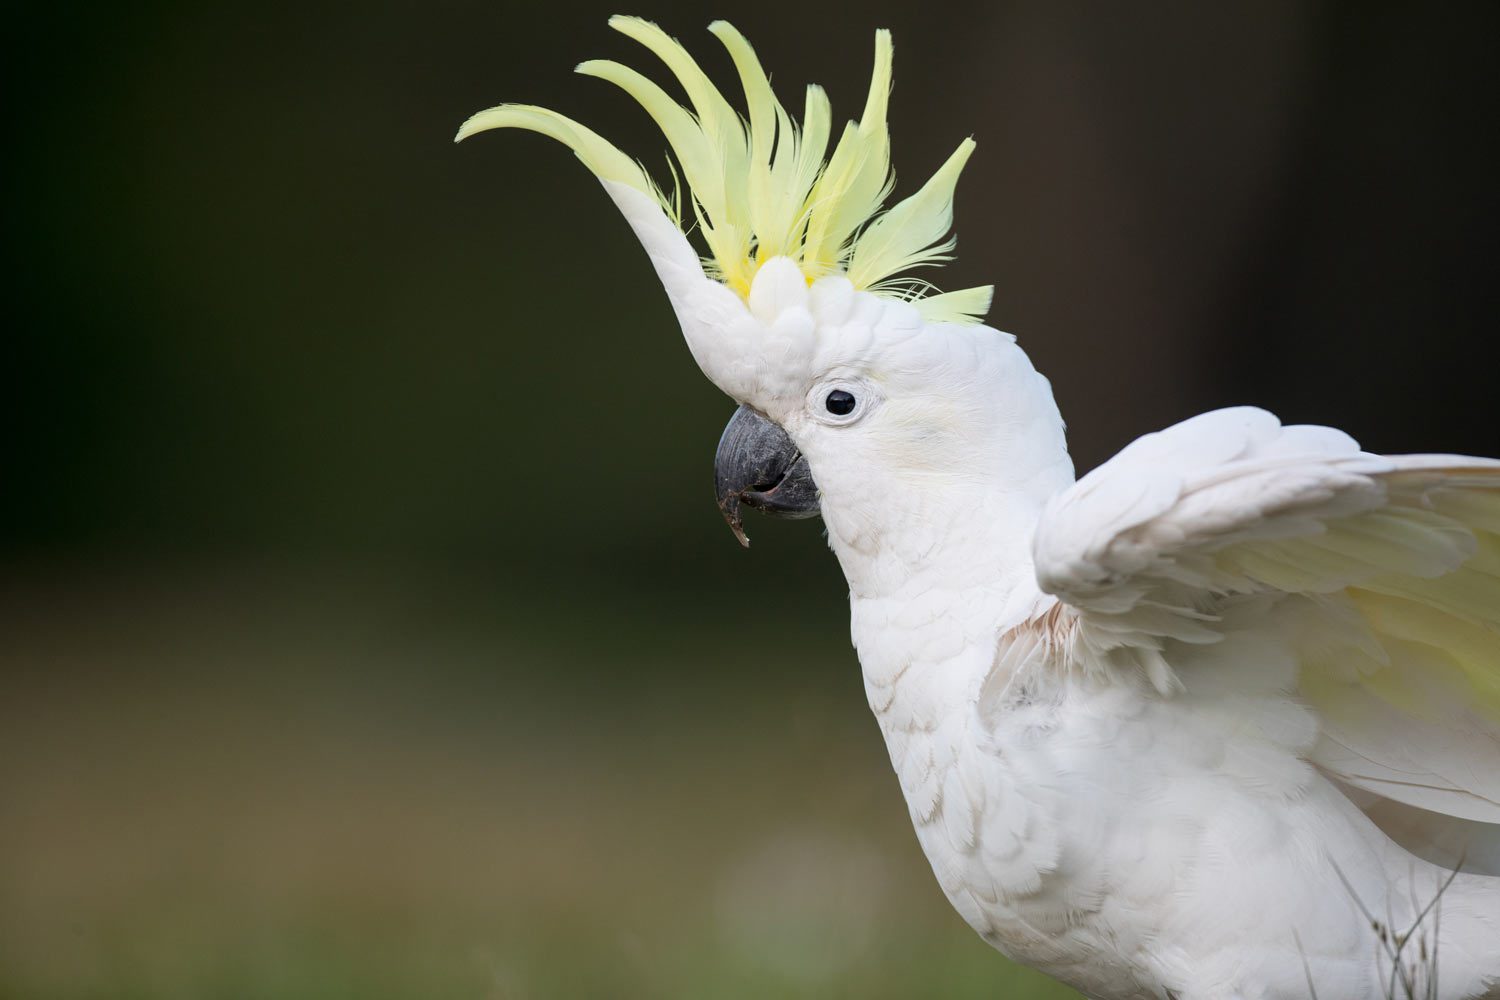 Profile shot of Sulphur-crested Cockatoo raising its crest and spreading wings